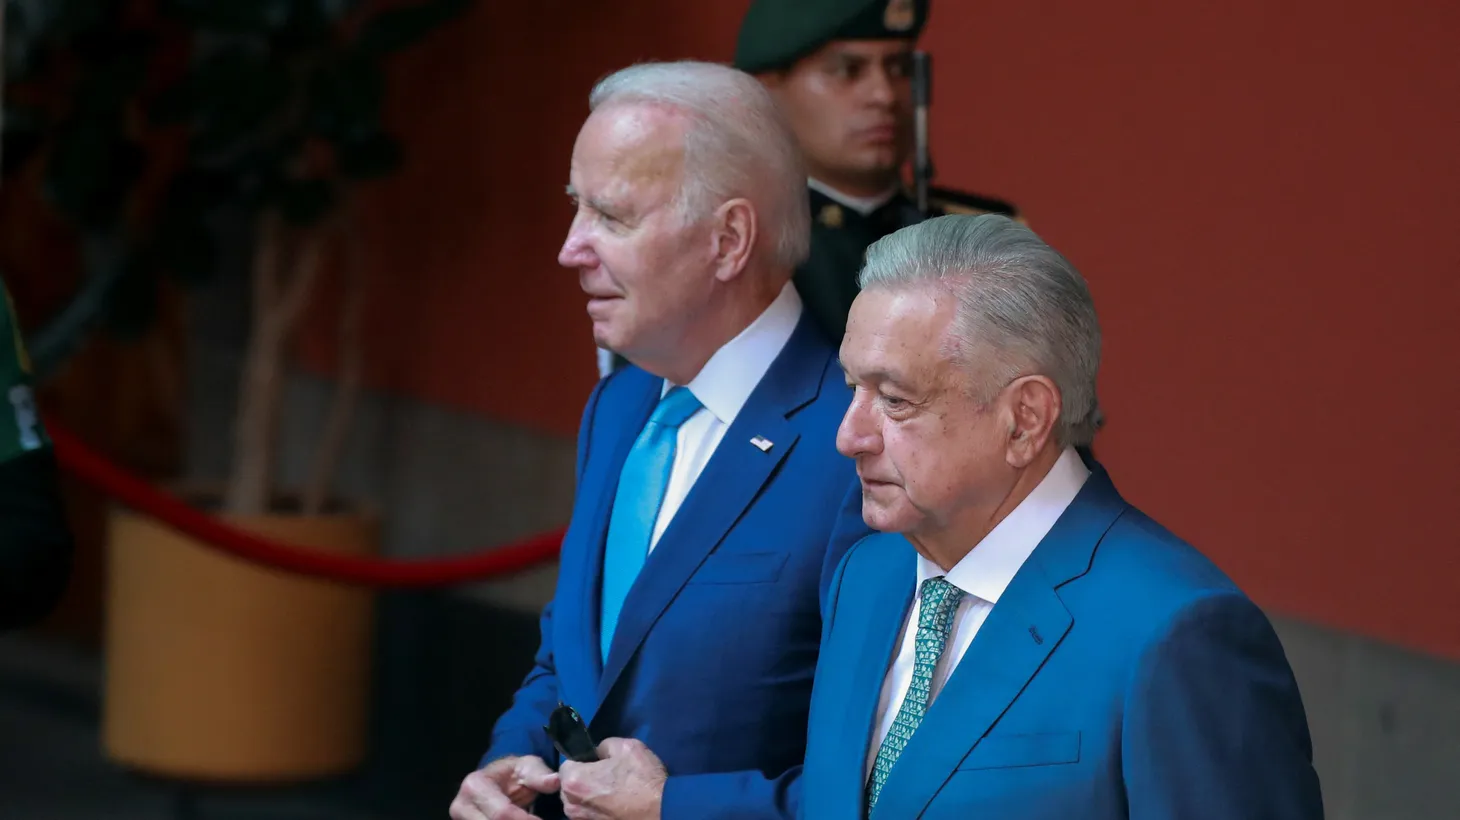 U.S. President Joe Biden meets his Mexican counterpart Andrés Manuel López Obrador, at North American Leaders’ Summit, at the National Palace in Mexico City, Mexico, January 10, 2023.